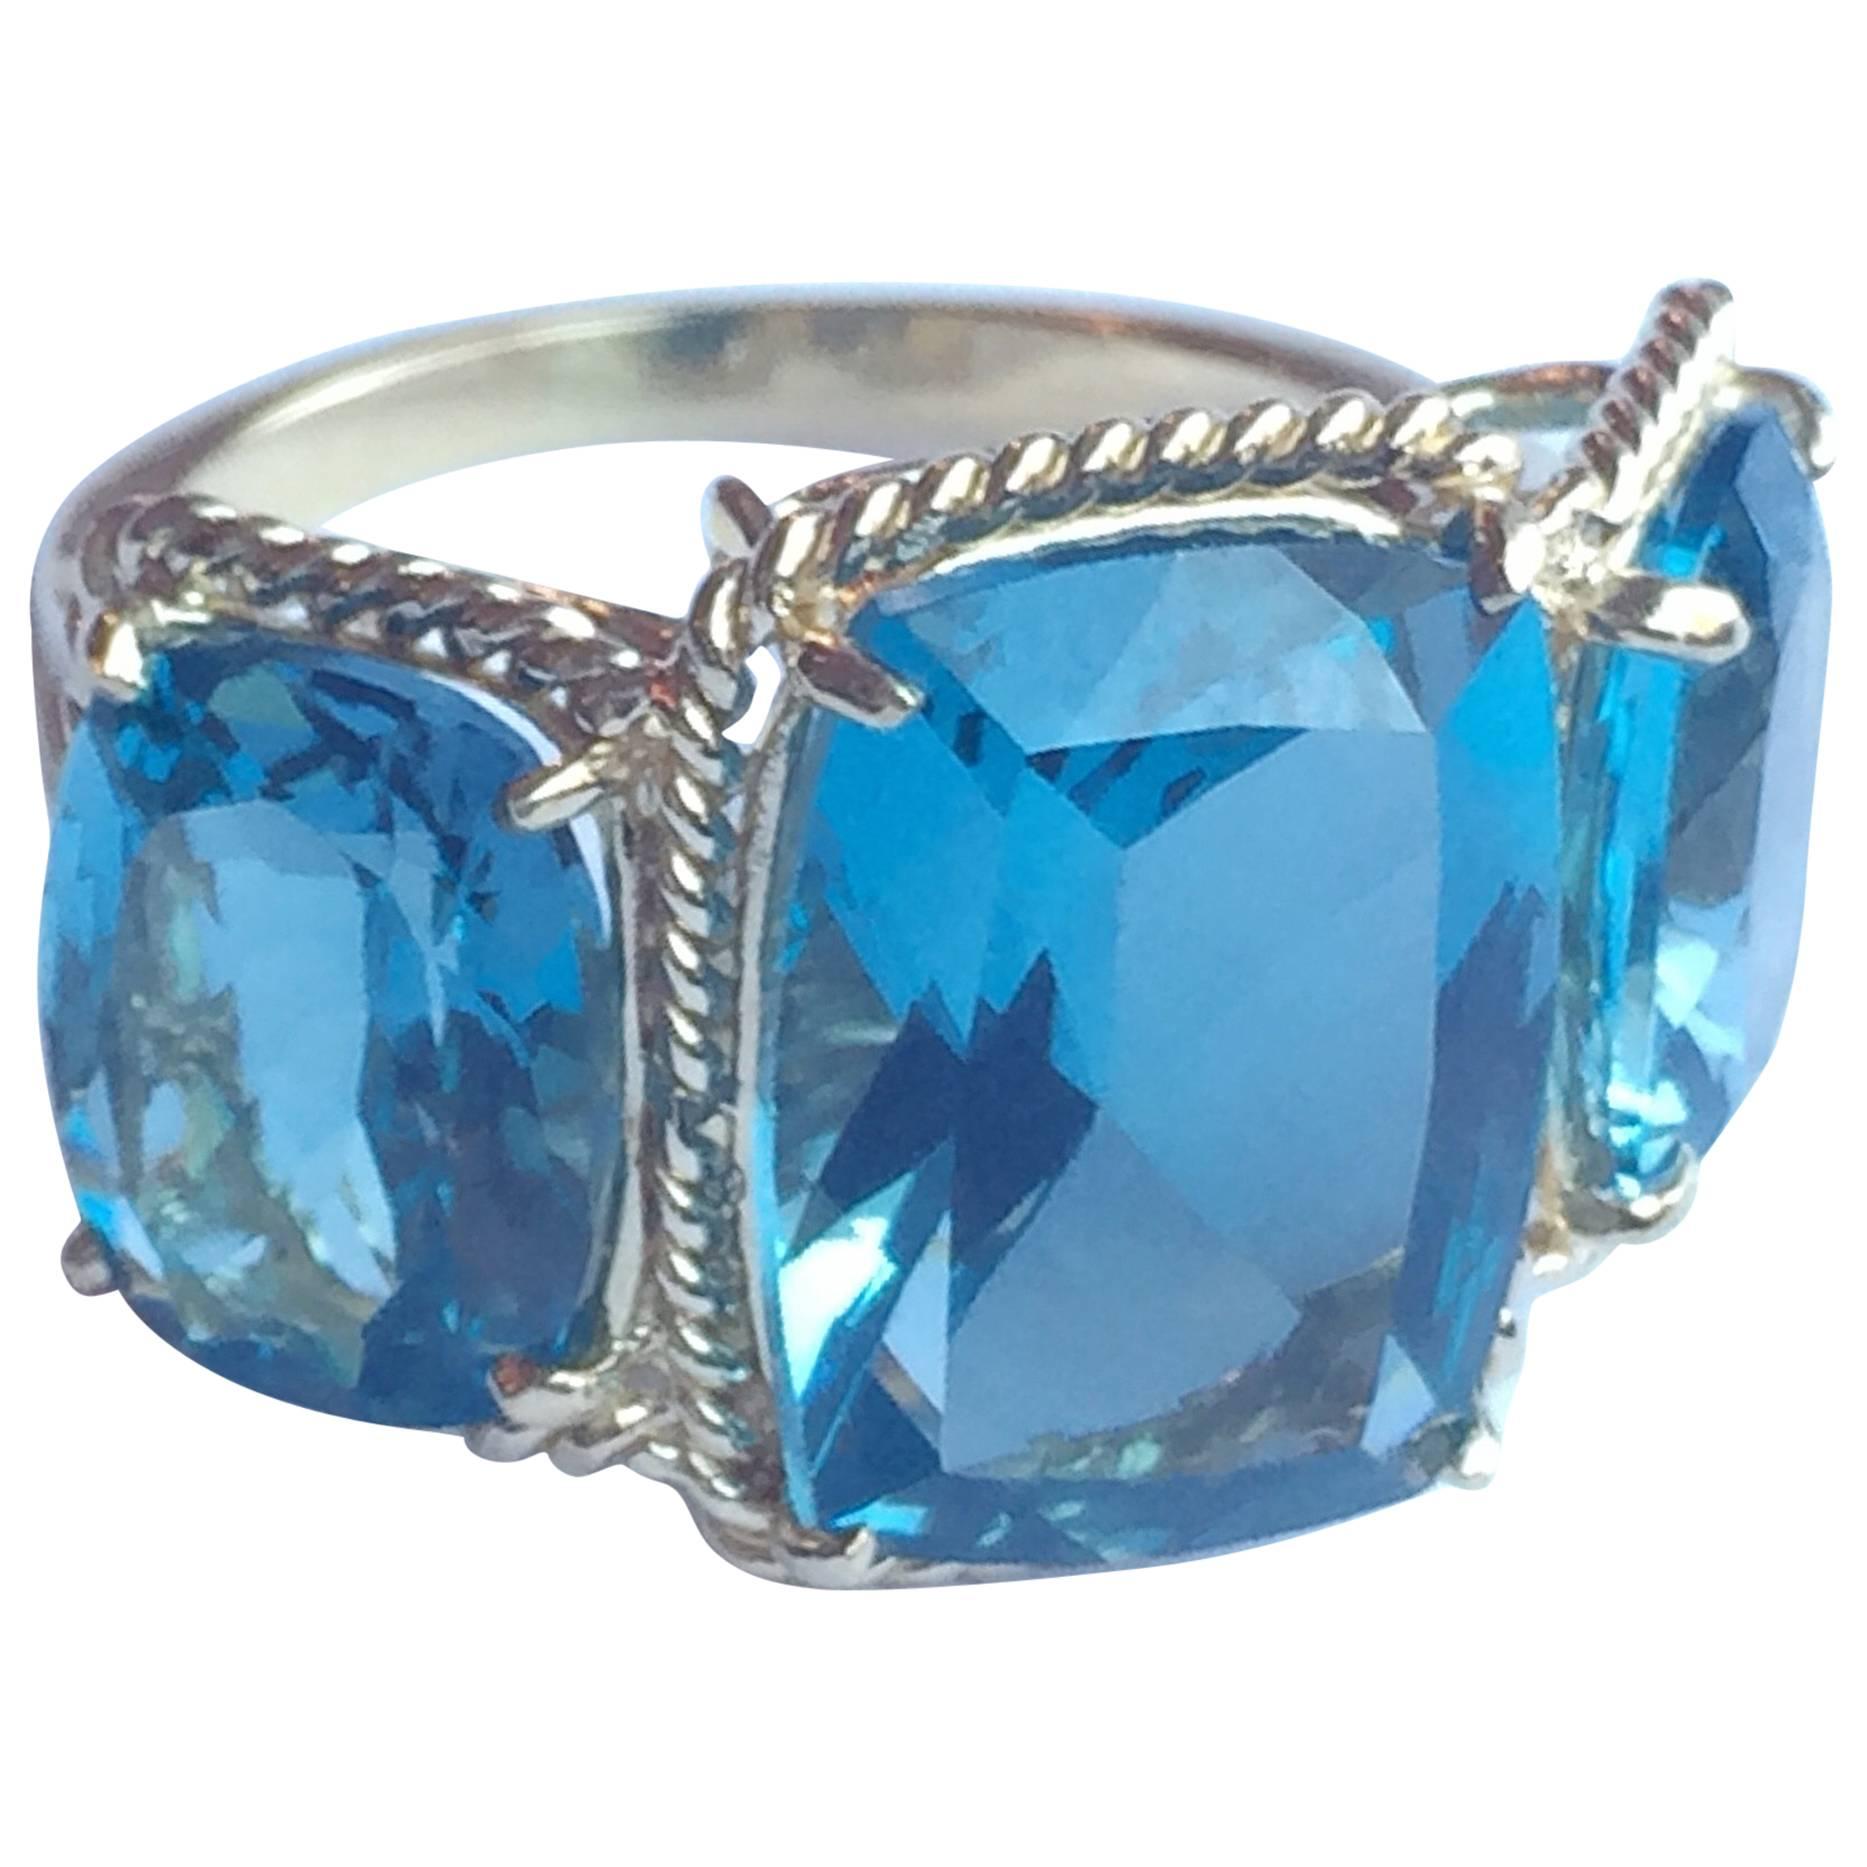 Three Stone Ring with Blue Topaz finished with Rope Twist Border